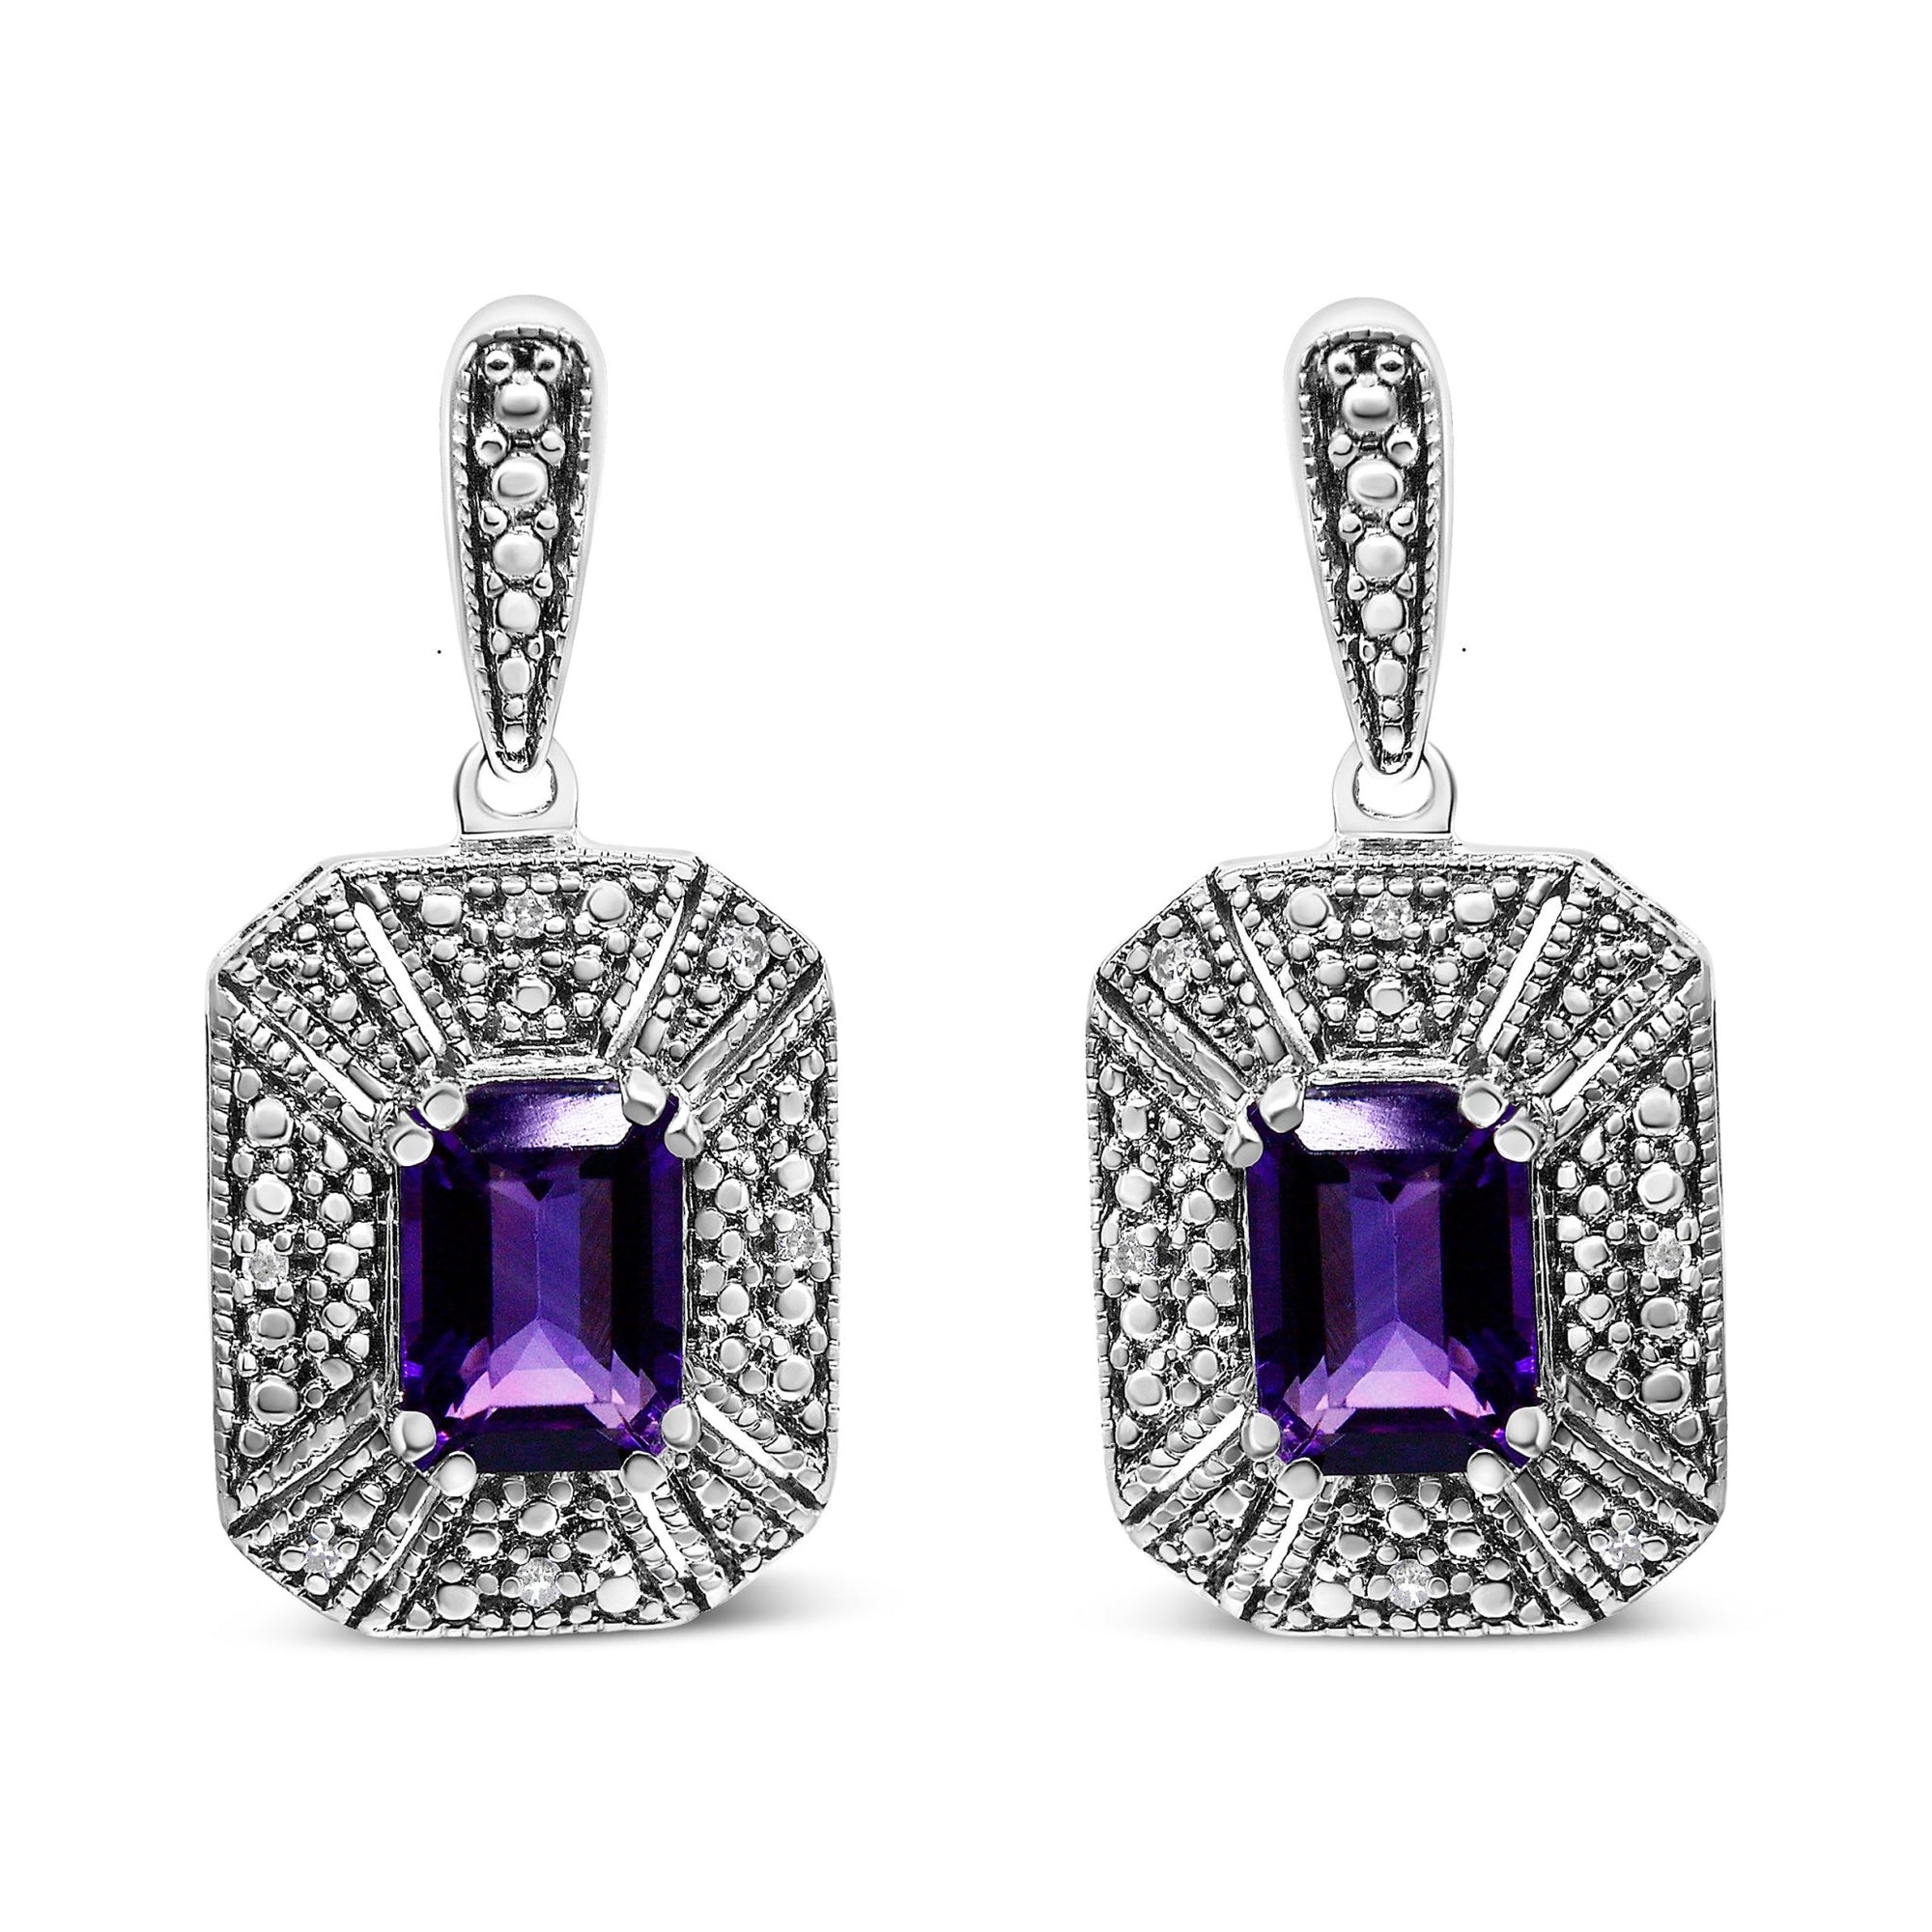 .925 Sterling Silver Diamond Accent and 7x5mm Purple Amethyst Stud Earrings (I-J Color, I2-I3 Clarity) - LinkagejewelrydesignLinkagejewelrydesign